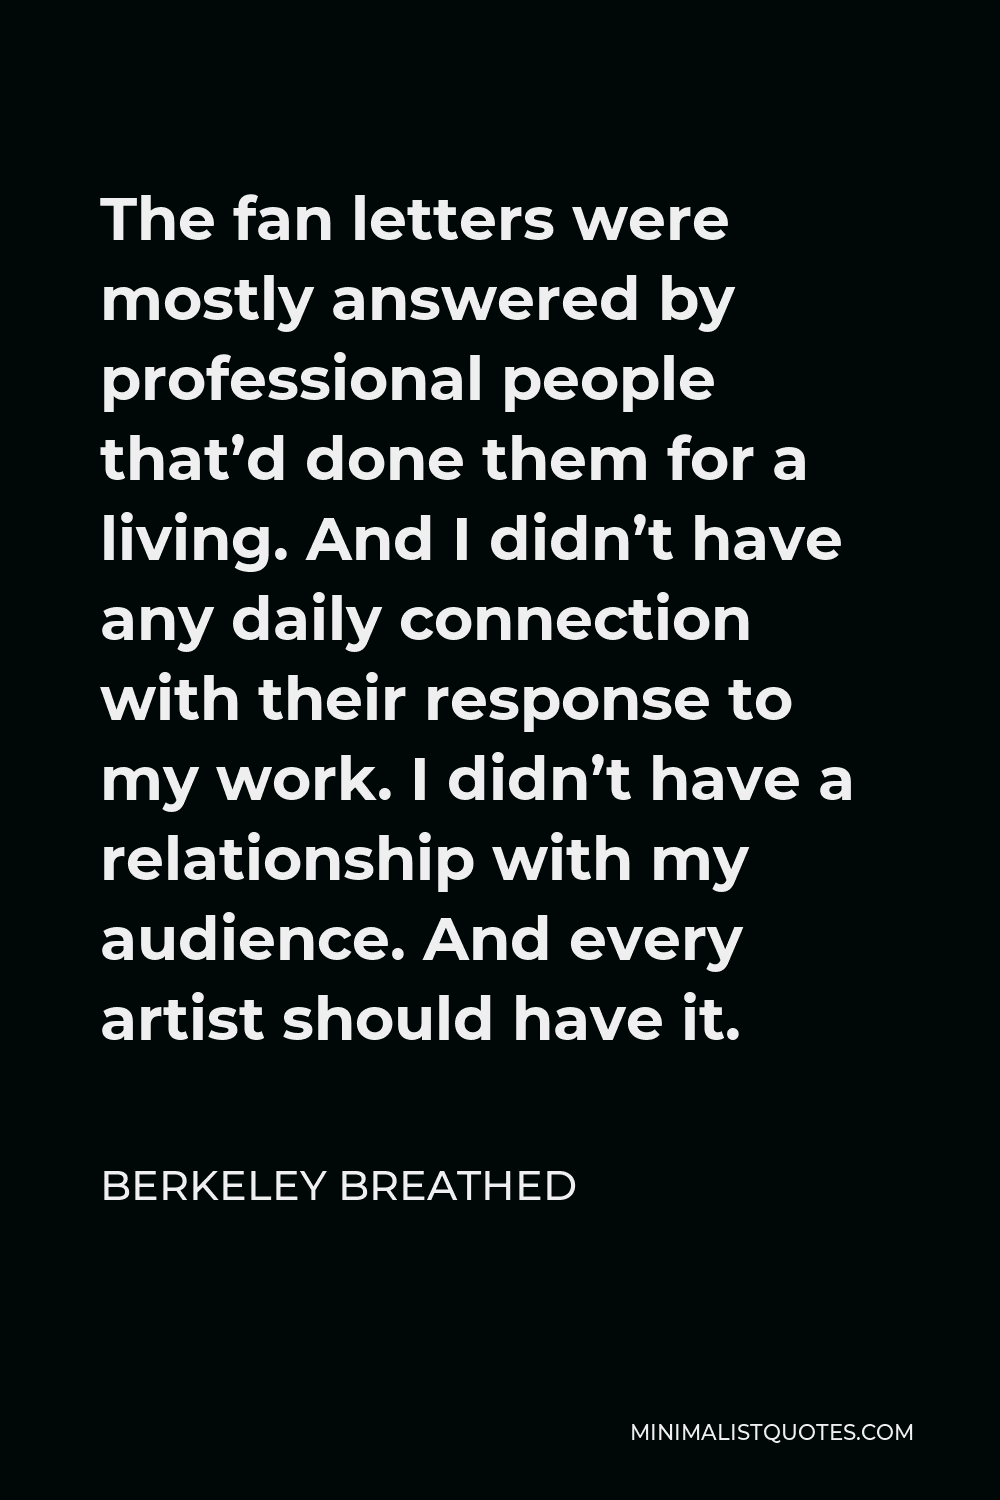 Berkeley Breathed Quote - The fan letters were mostly answered by professional people that’d done them for a living. And I didn’t have any daily connection with their response to my work. I didn’t have a relationship with my audience. And every artist should have it.